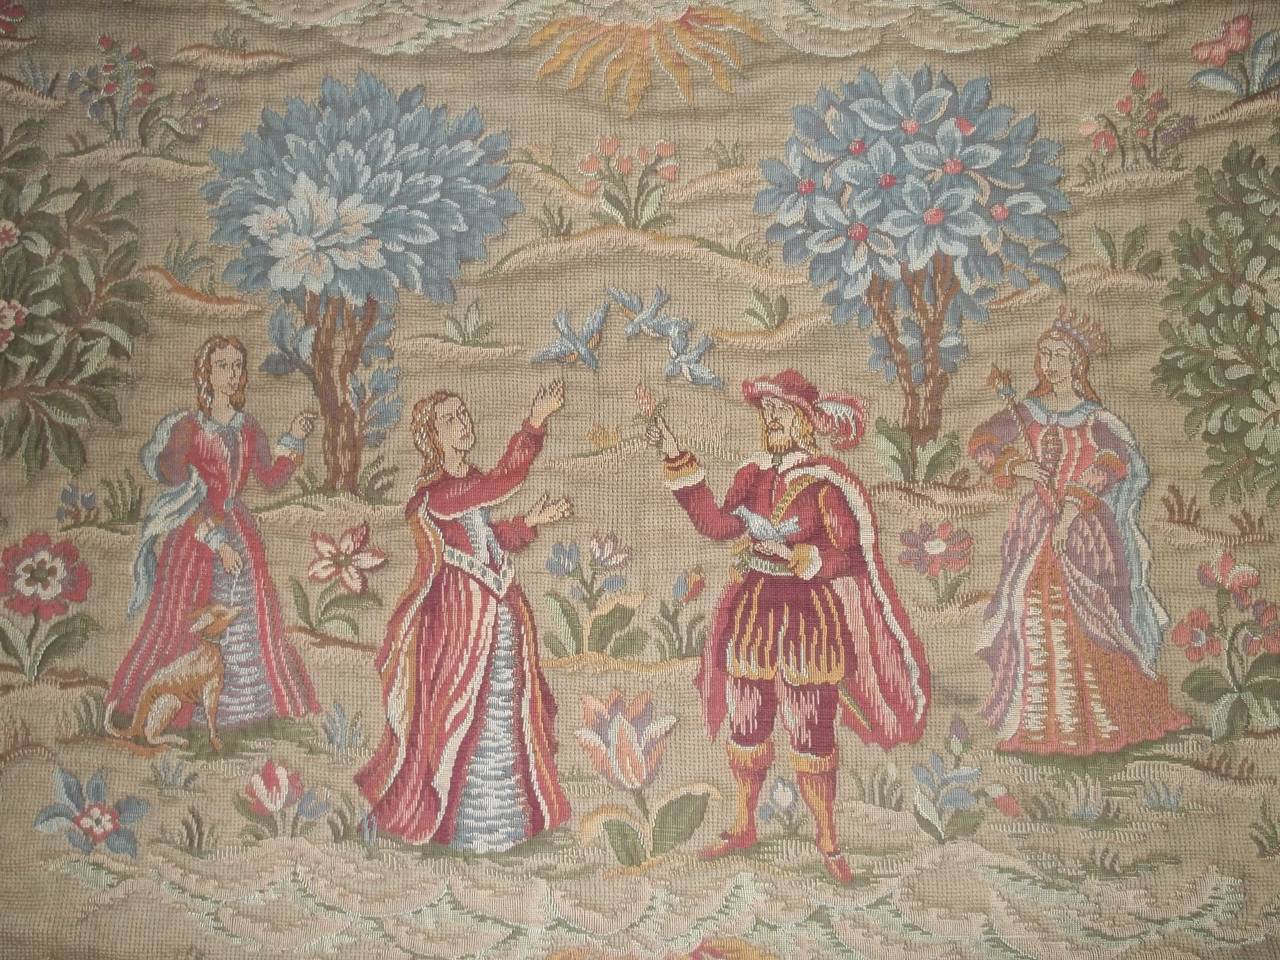 This is a large and beautiful antique French Jacquard woven wool tapestry, in the Aubusson style, dated around the mid-19th century, circa 1850.

The design depicts a gathering of people in a woodland setting – perhaps a king and queen with